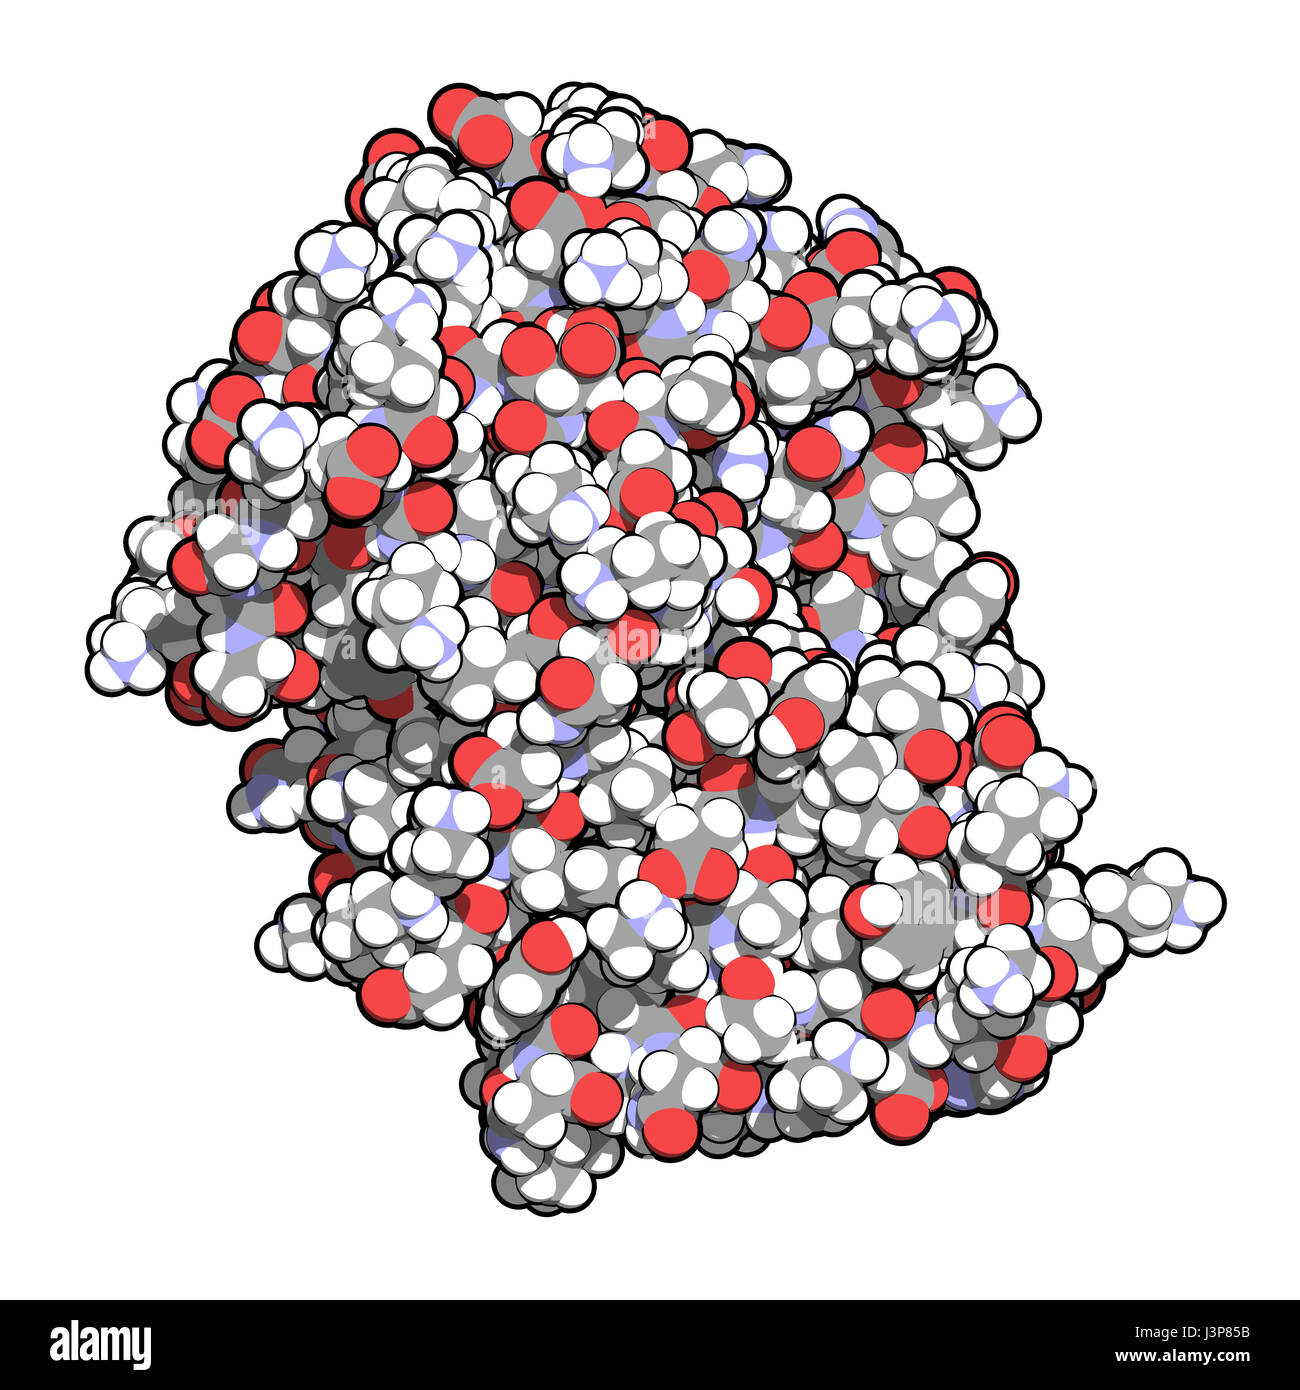 Beta-lactamase enzyme from Staphylococcus aureus. Responsible for resistance against penicillin and related antibiotics. Atoms shown as color-coded sp Stock Photo